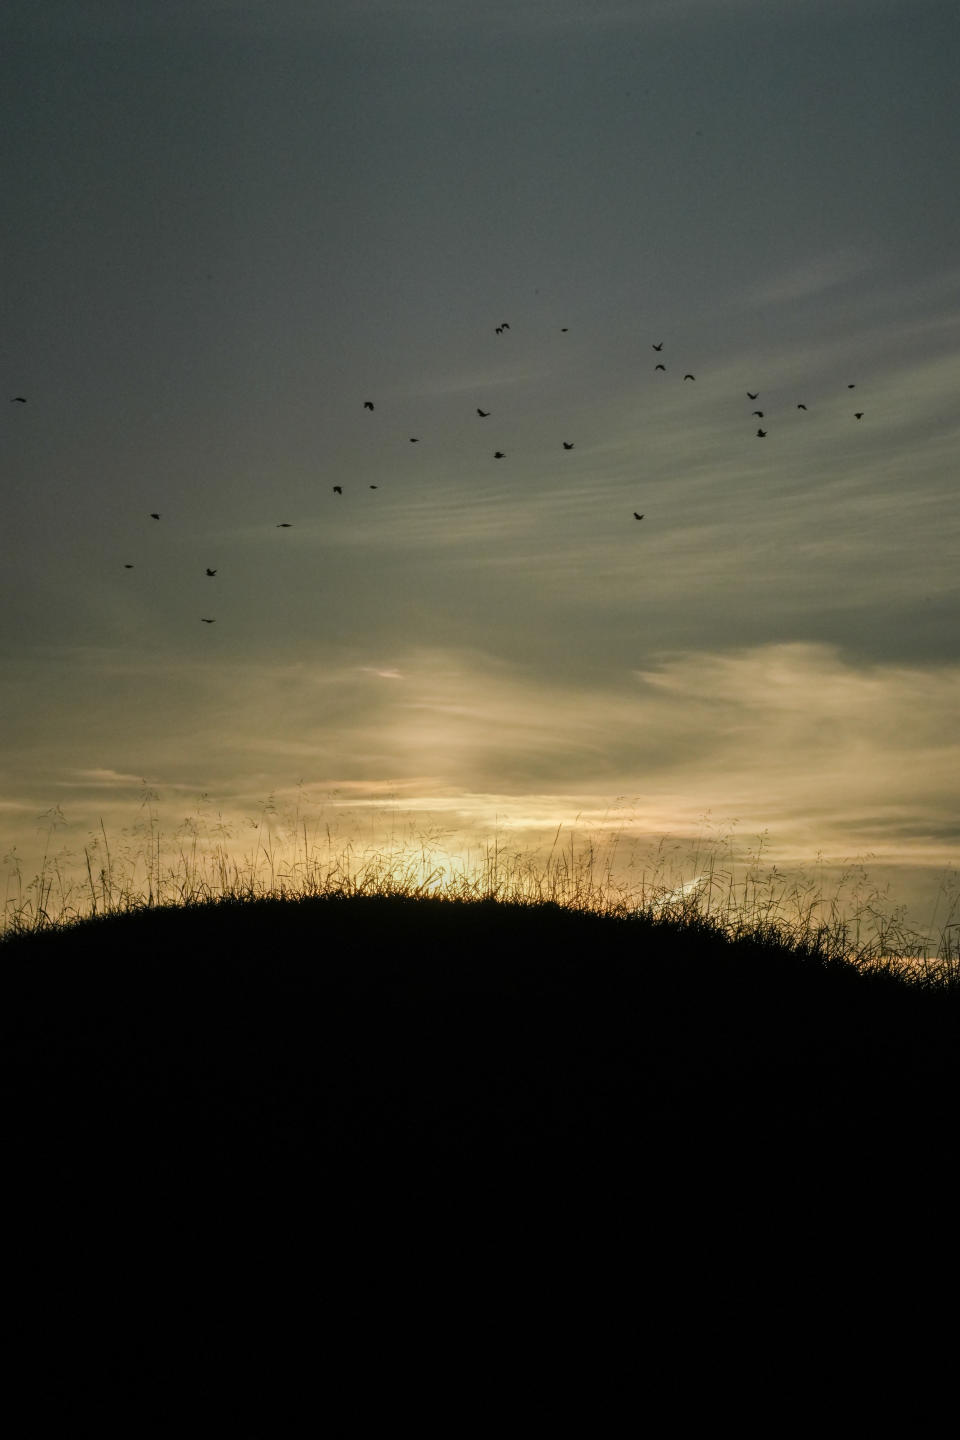 The sun rises over one of the Twin Mounds at Fort Ancient Earthworks, Tuesday, Sept. 19, 2023, in Oregonia, Ohio. Fort Ancient is part of a network of ancient American Indian ceremonial and burial mounds around Ohio that were added to the list of UNESCO World Heritage sites. (AP Photo/Joshua A. Bickel)